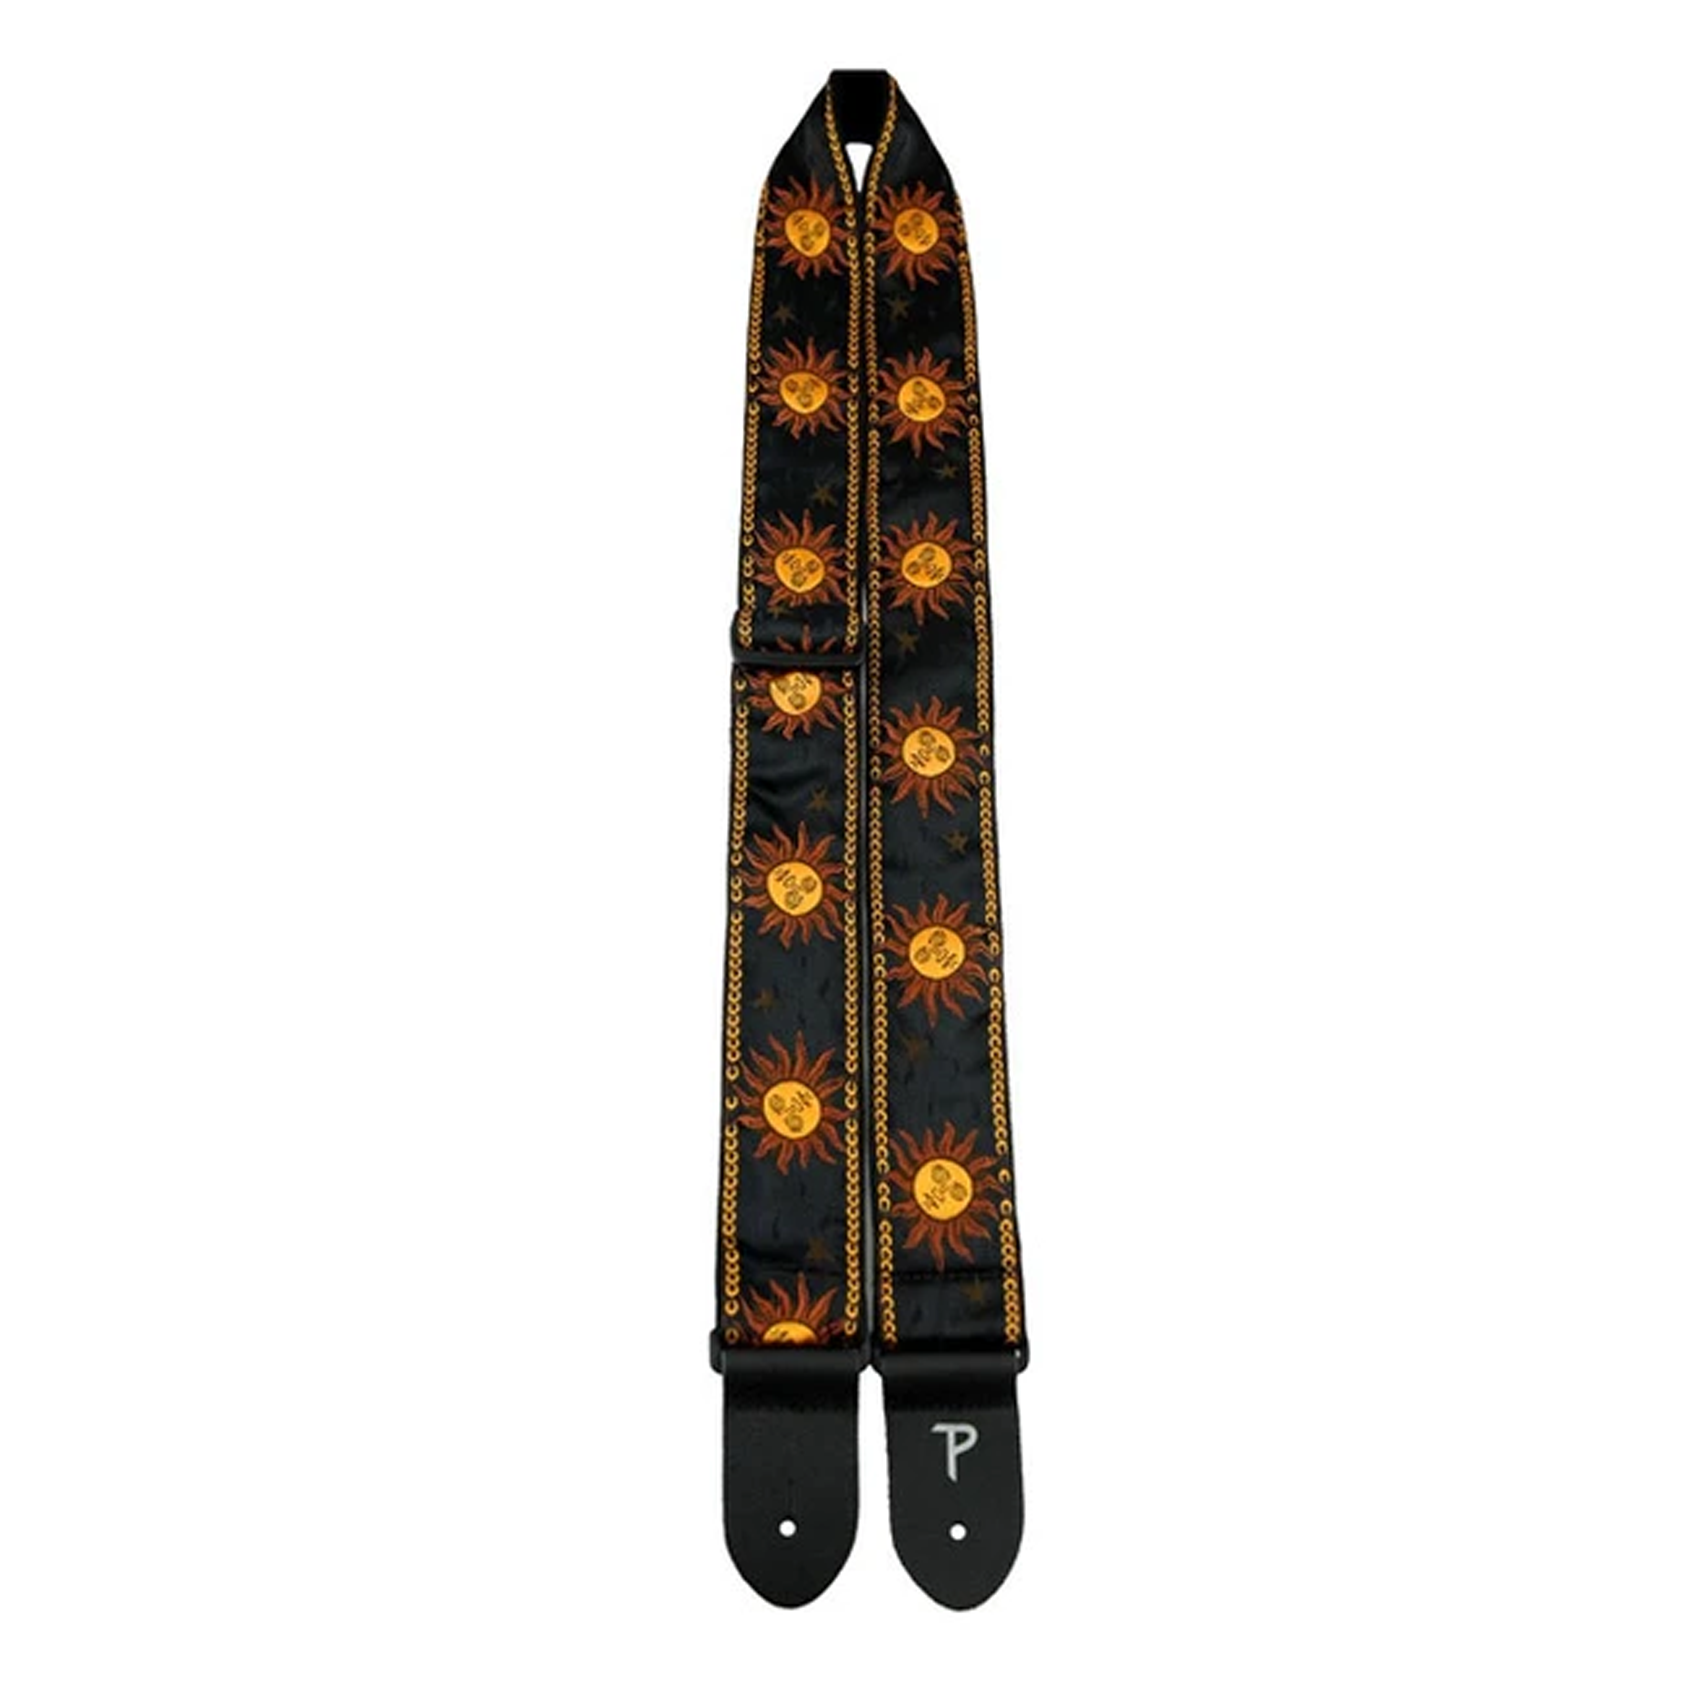 PERRIS 2" JACQUARD GUITAR STRAP WITH YELLOW SUNS ON BLACK BACKING DESIGN